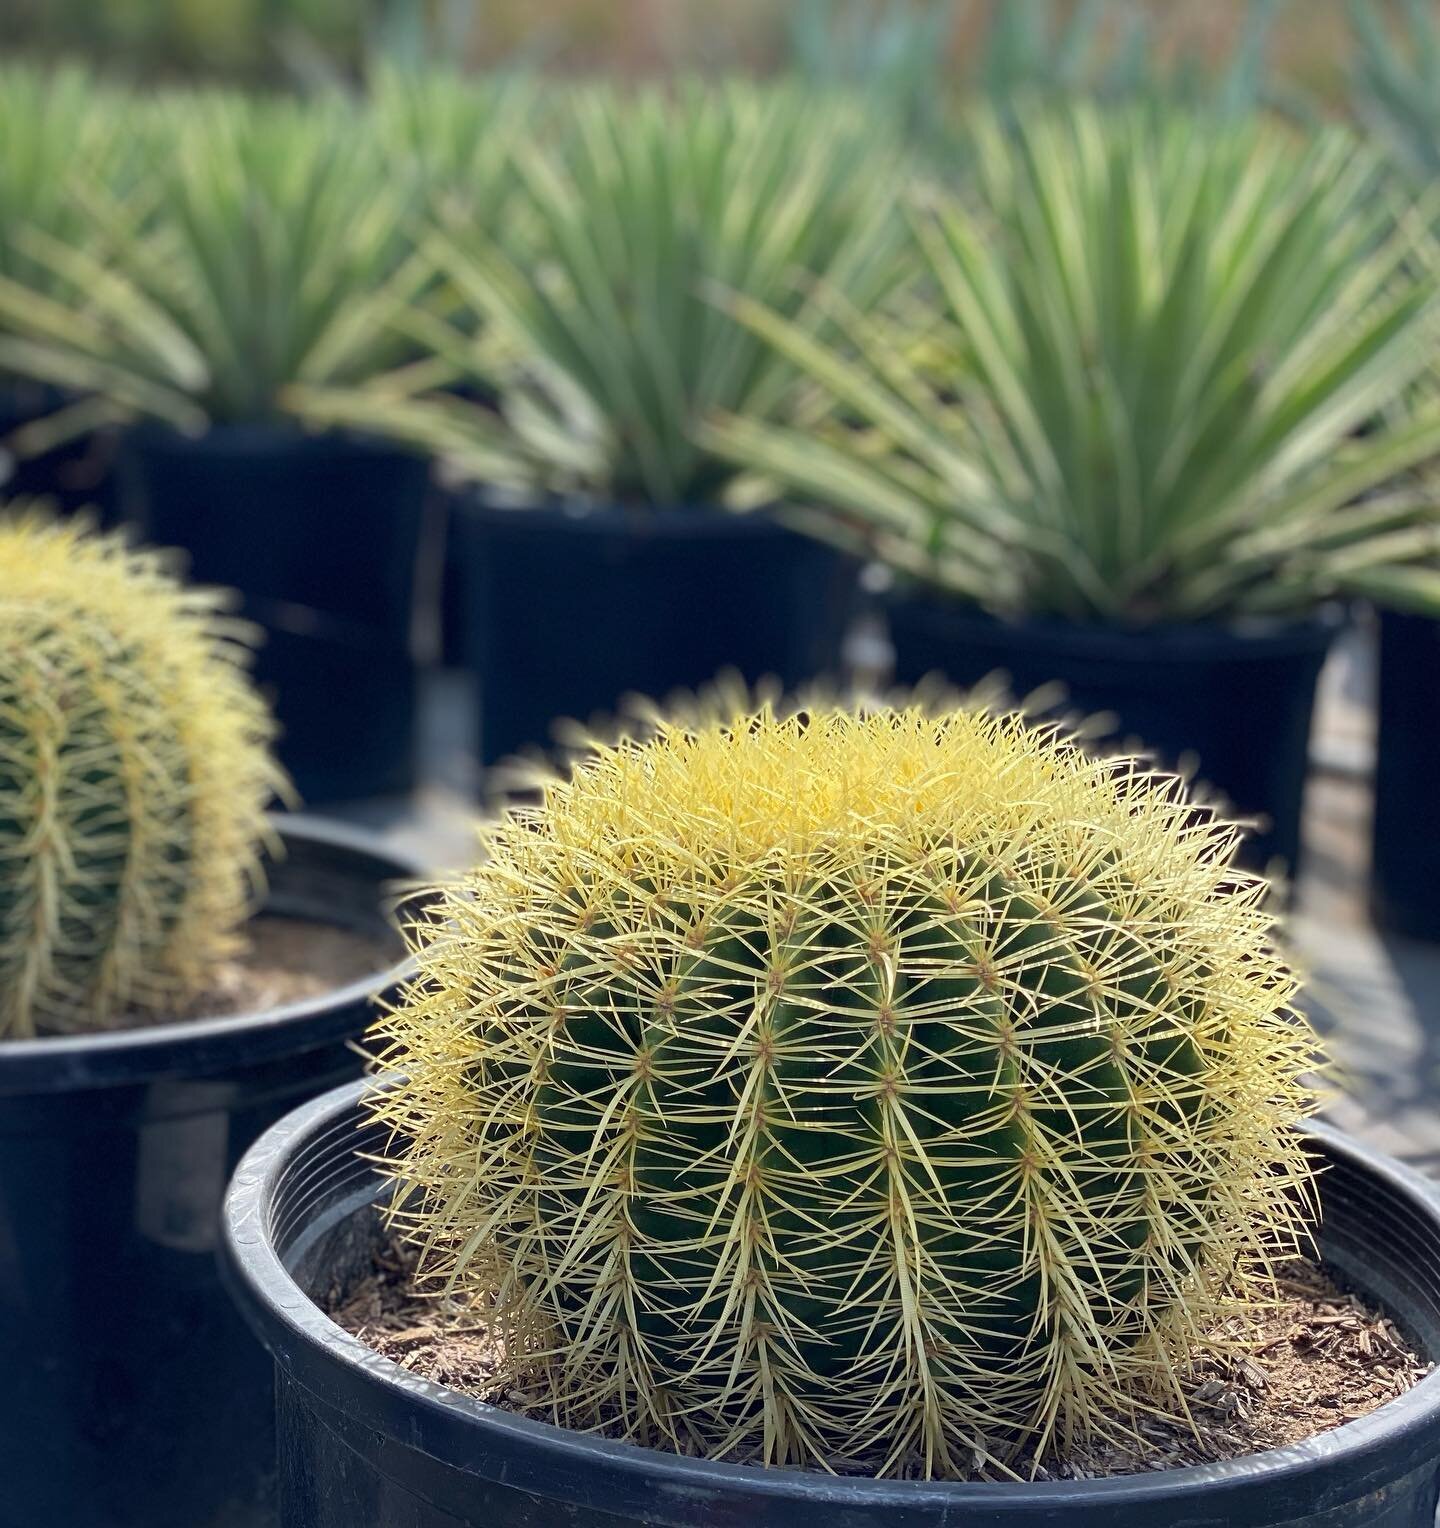 Plant selection day, scoping out barrel cactus and agave for the droughtful landscape - always enjoyable, never prickly at @vine.and.branch nursery. 
⁣
#barrelcactus #echinocactus #agave #xeriscape #drought #plants #plantingdesign #landscape #landsca